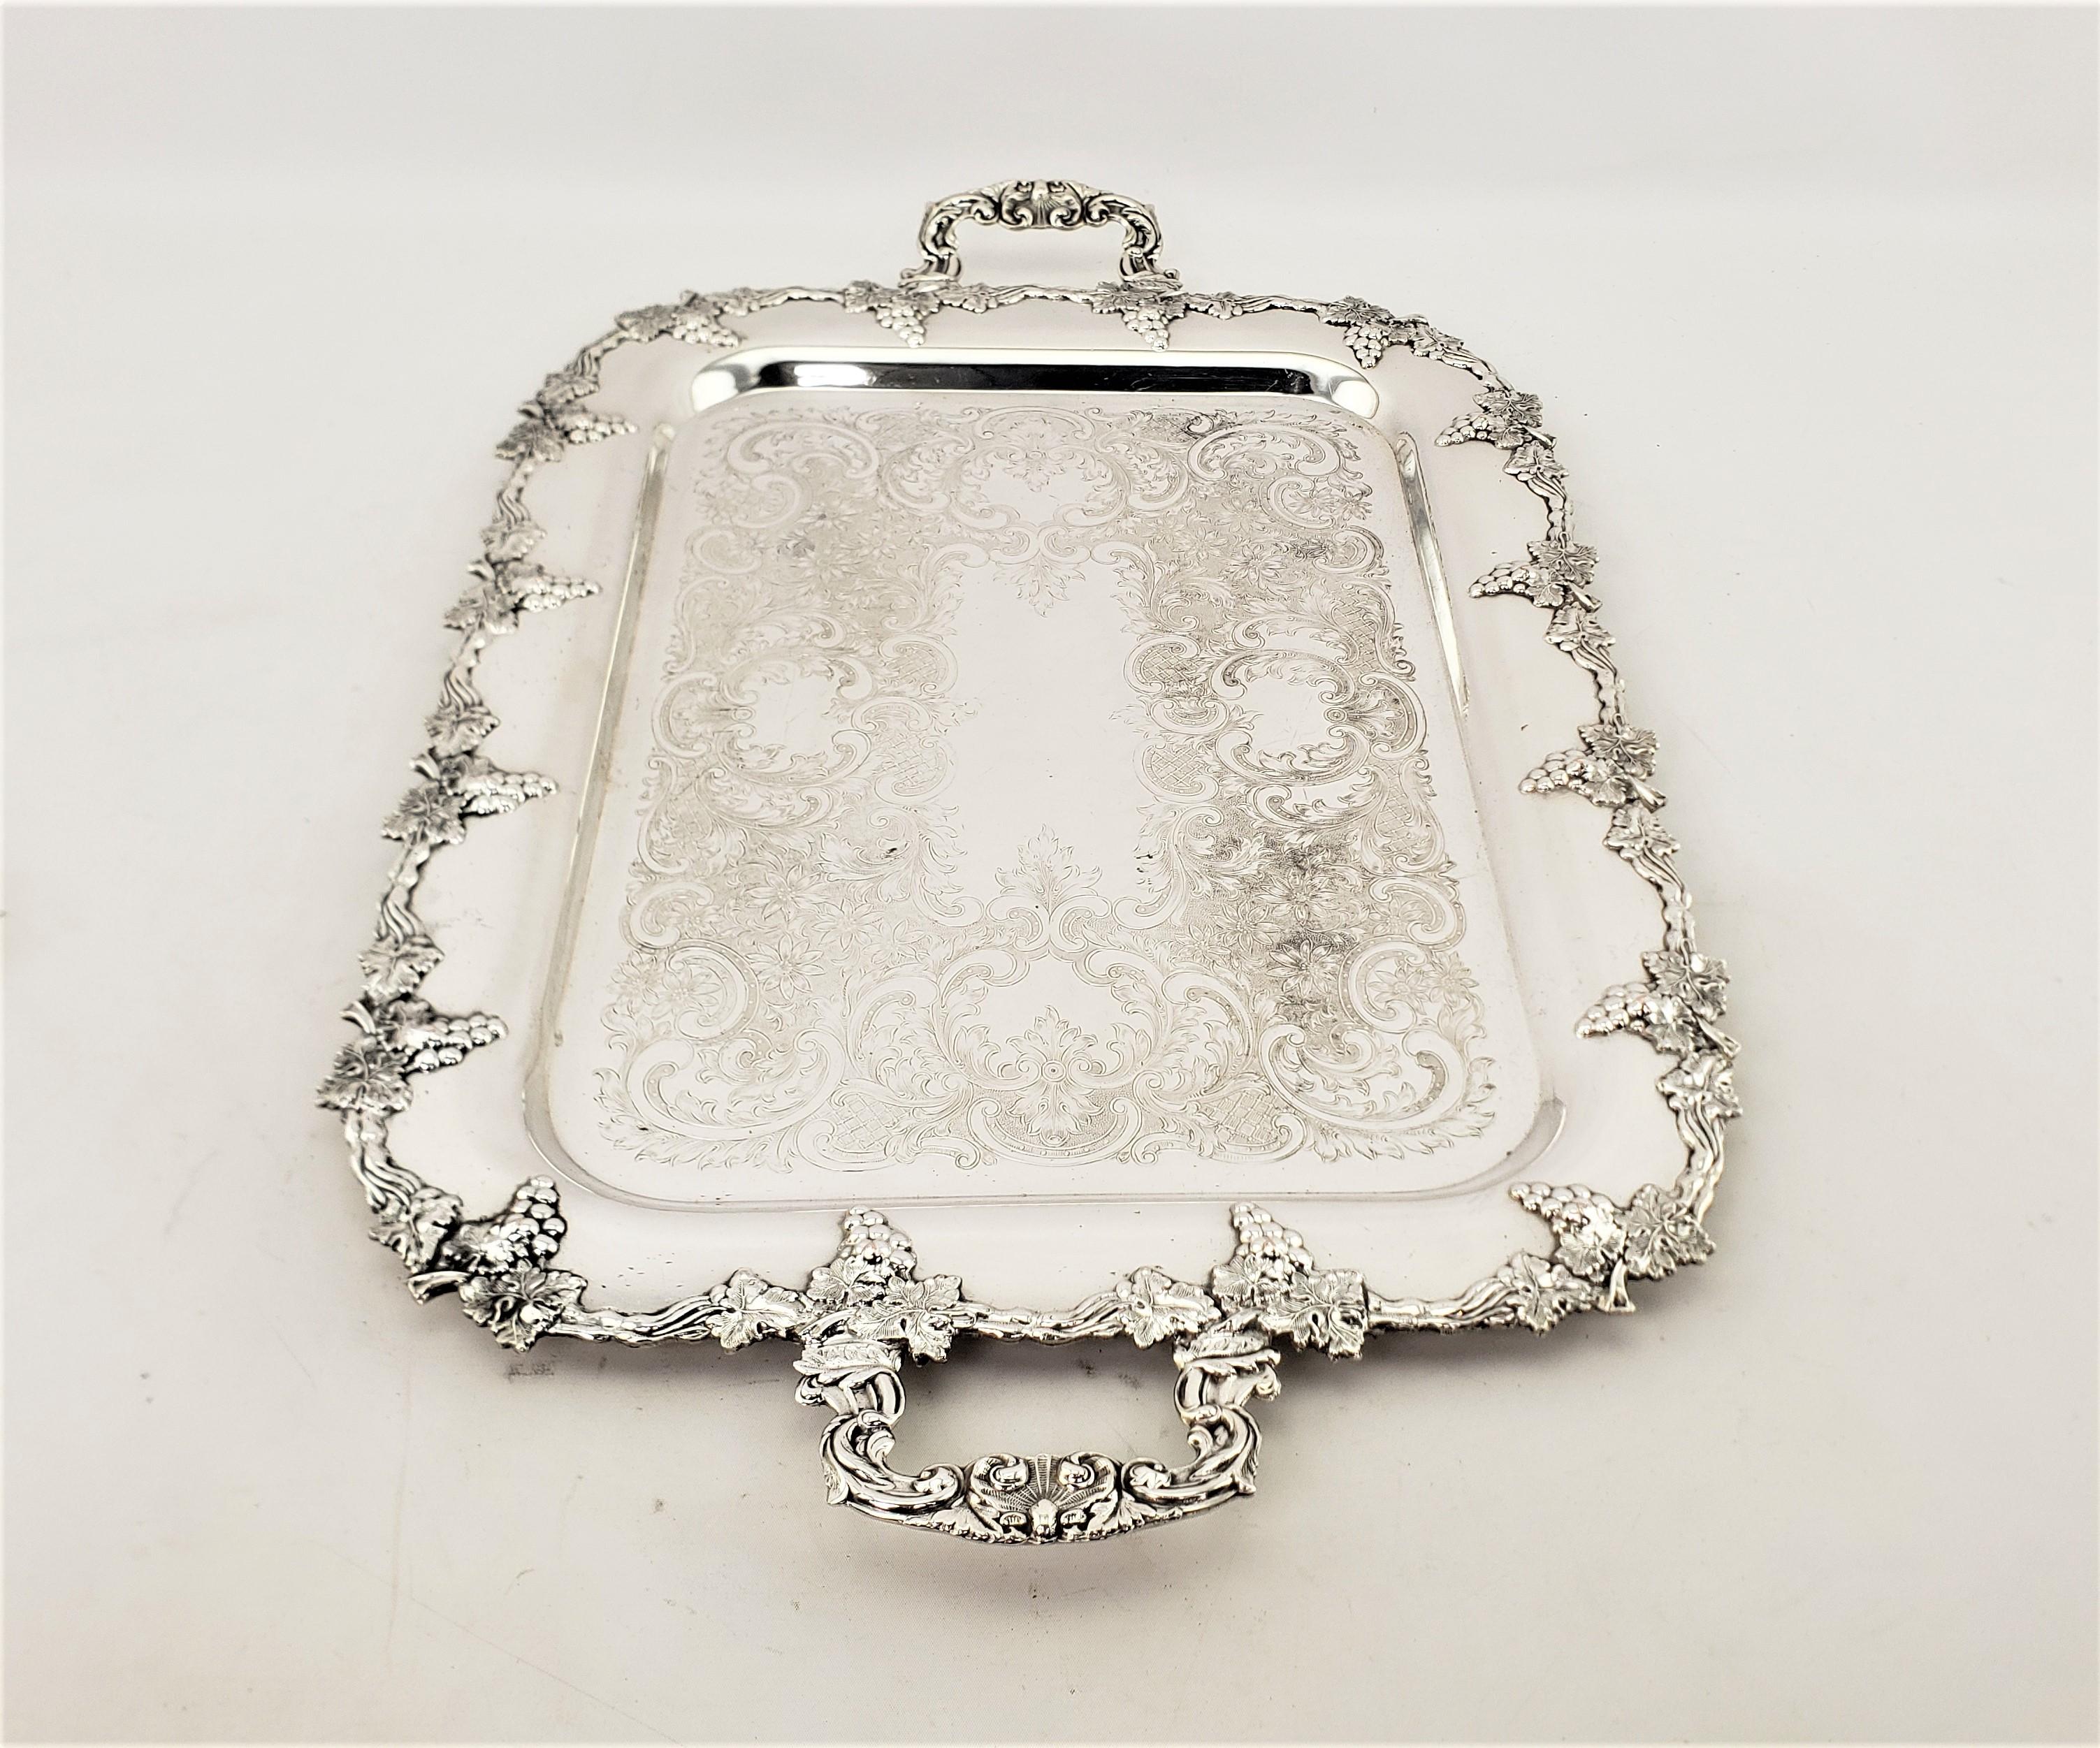 English Antique Sheffield Reproduction Silver Plated Serving Tray with Grapes & Leaves For Sale